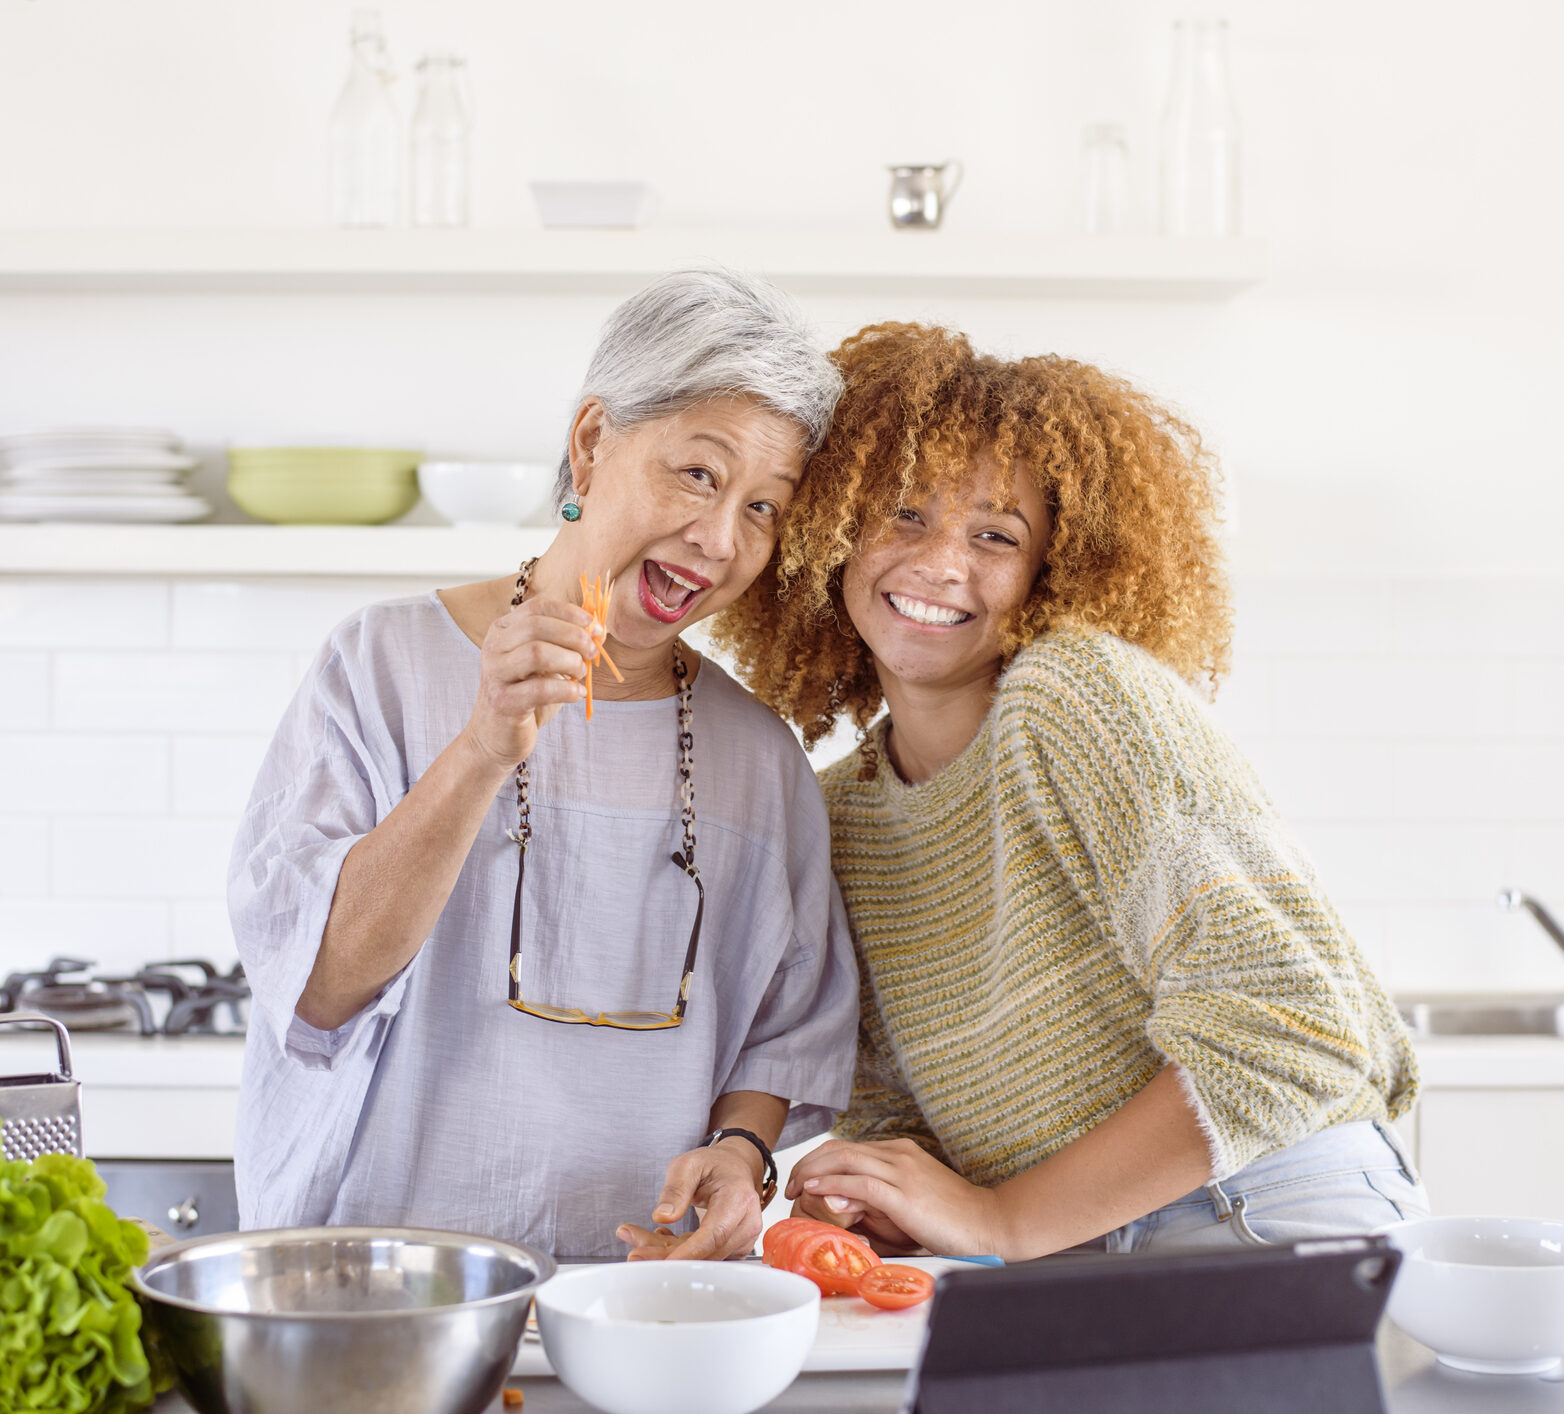 Woman and her daughter smiling making food